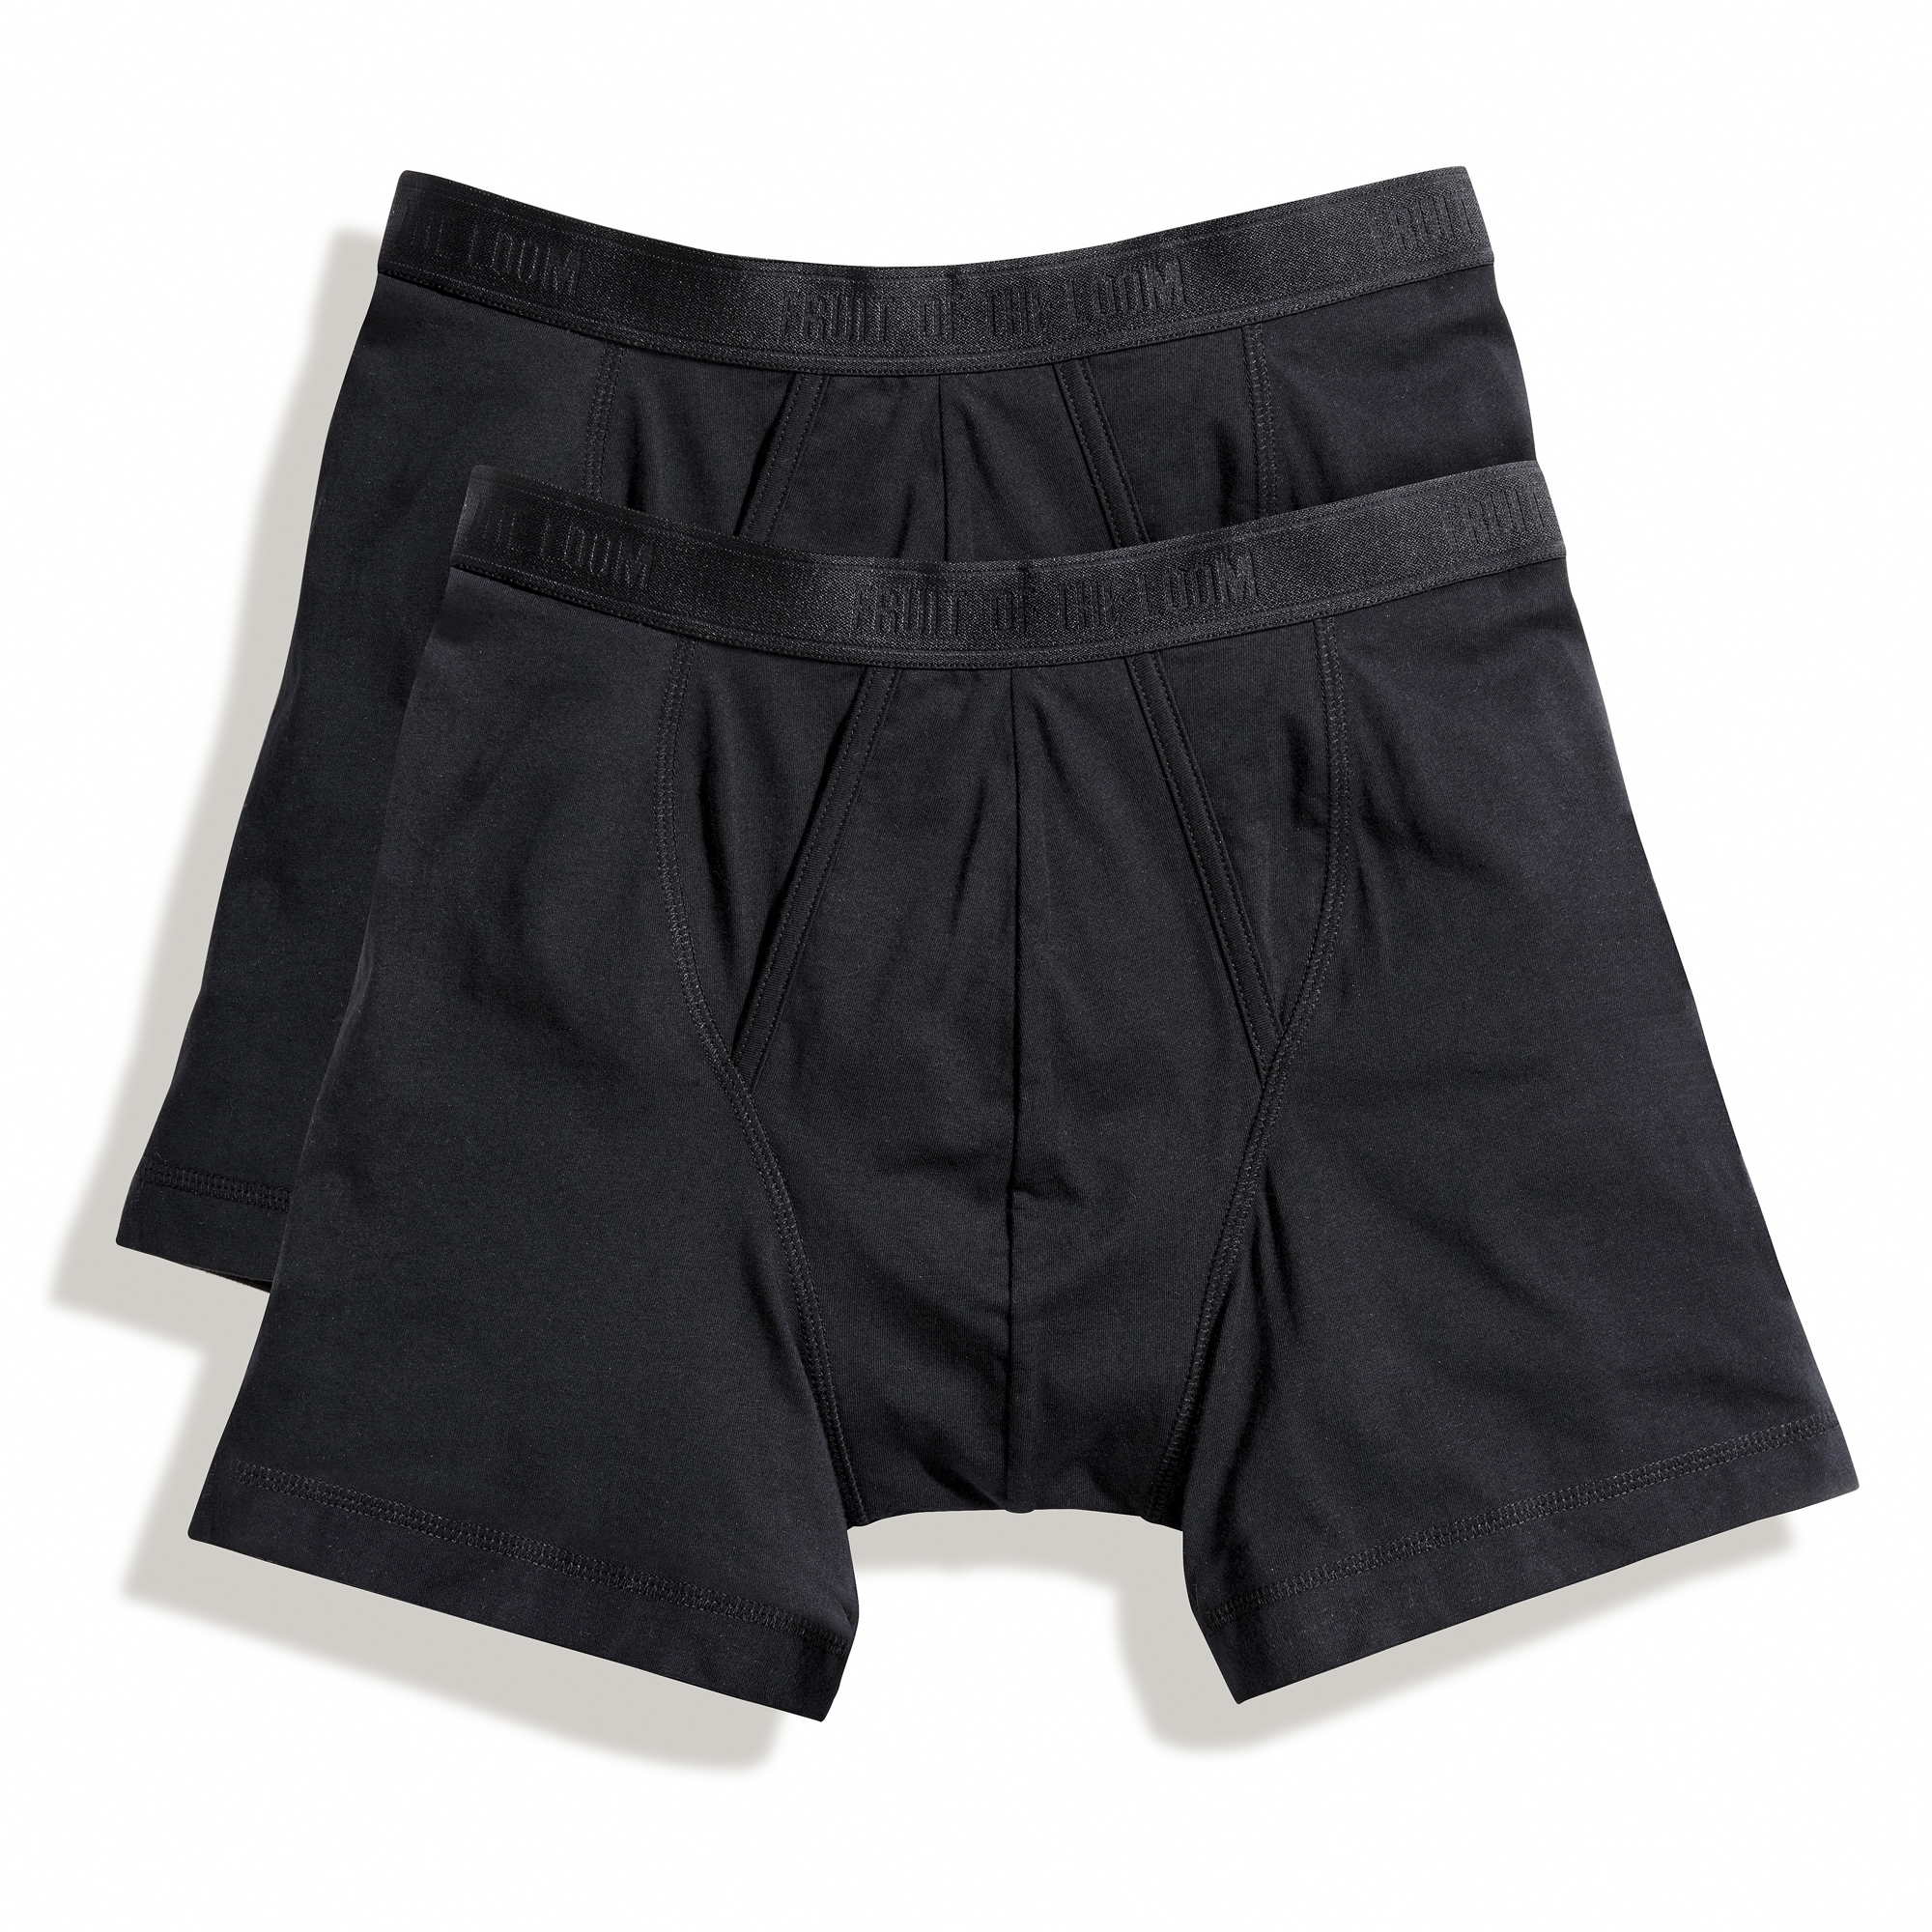 Boxers Fruit Of The Loom Modelo Classic (pack De 2)